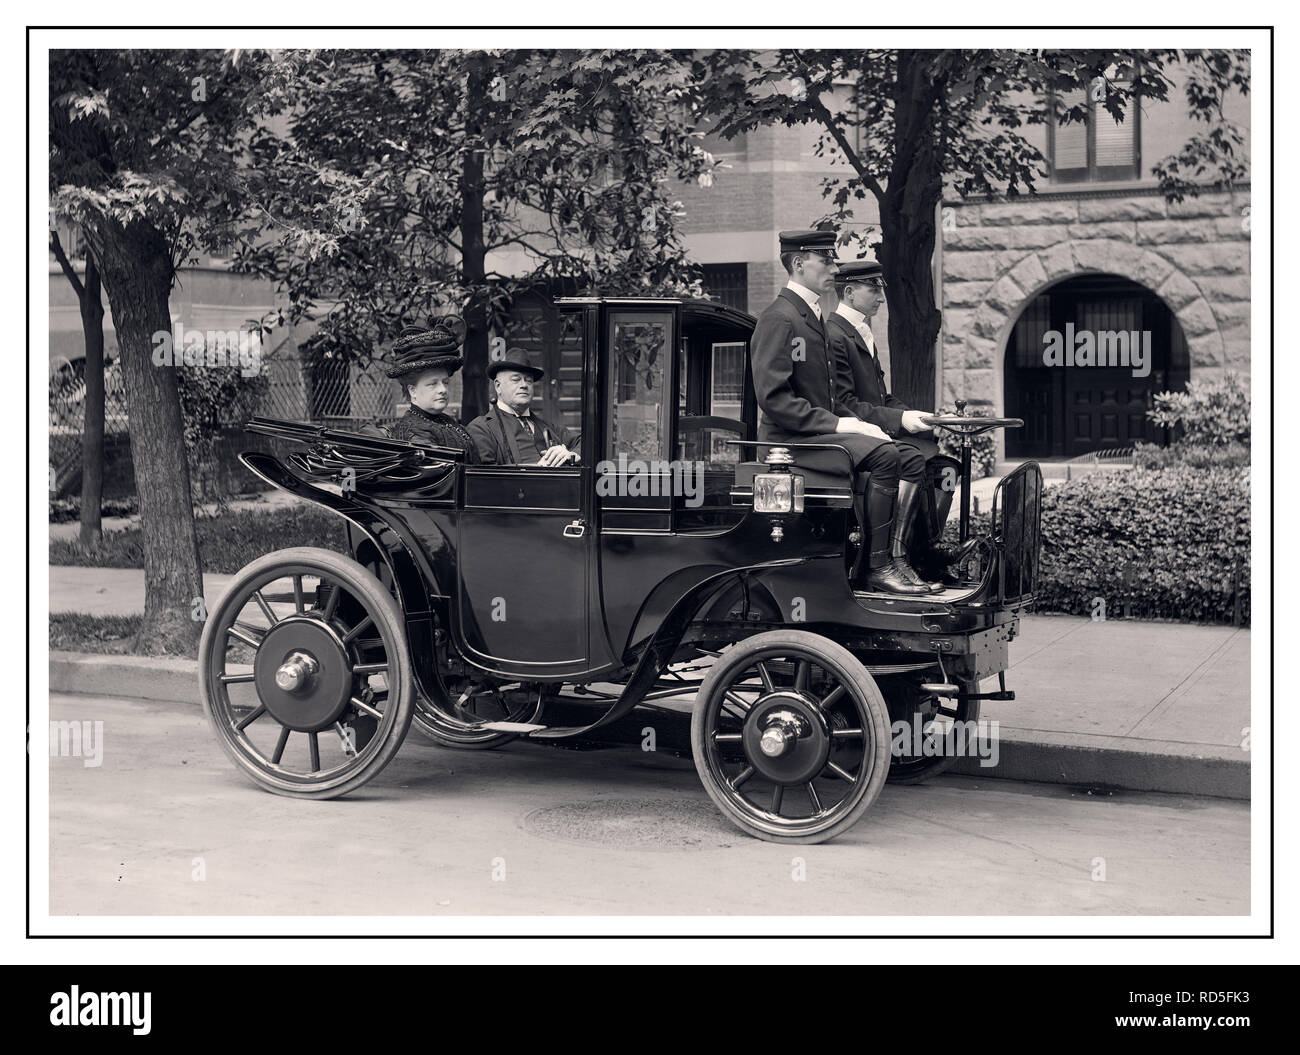 ELECTRIC CAR Vintage 1906 KRIEGER American Automobile with Senator George P. Wetmore of Rhode Island in a Krieger automobile, circa 1906. Senator Wetmore is in back with his wife. A driver and footman are in front of vehicle. Rhode Island USA Stock Photo